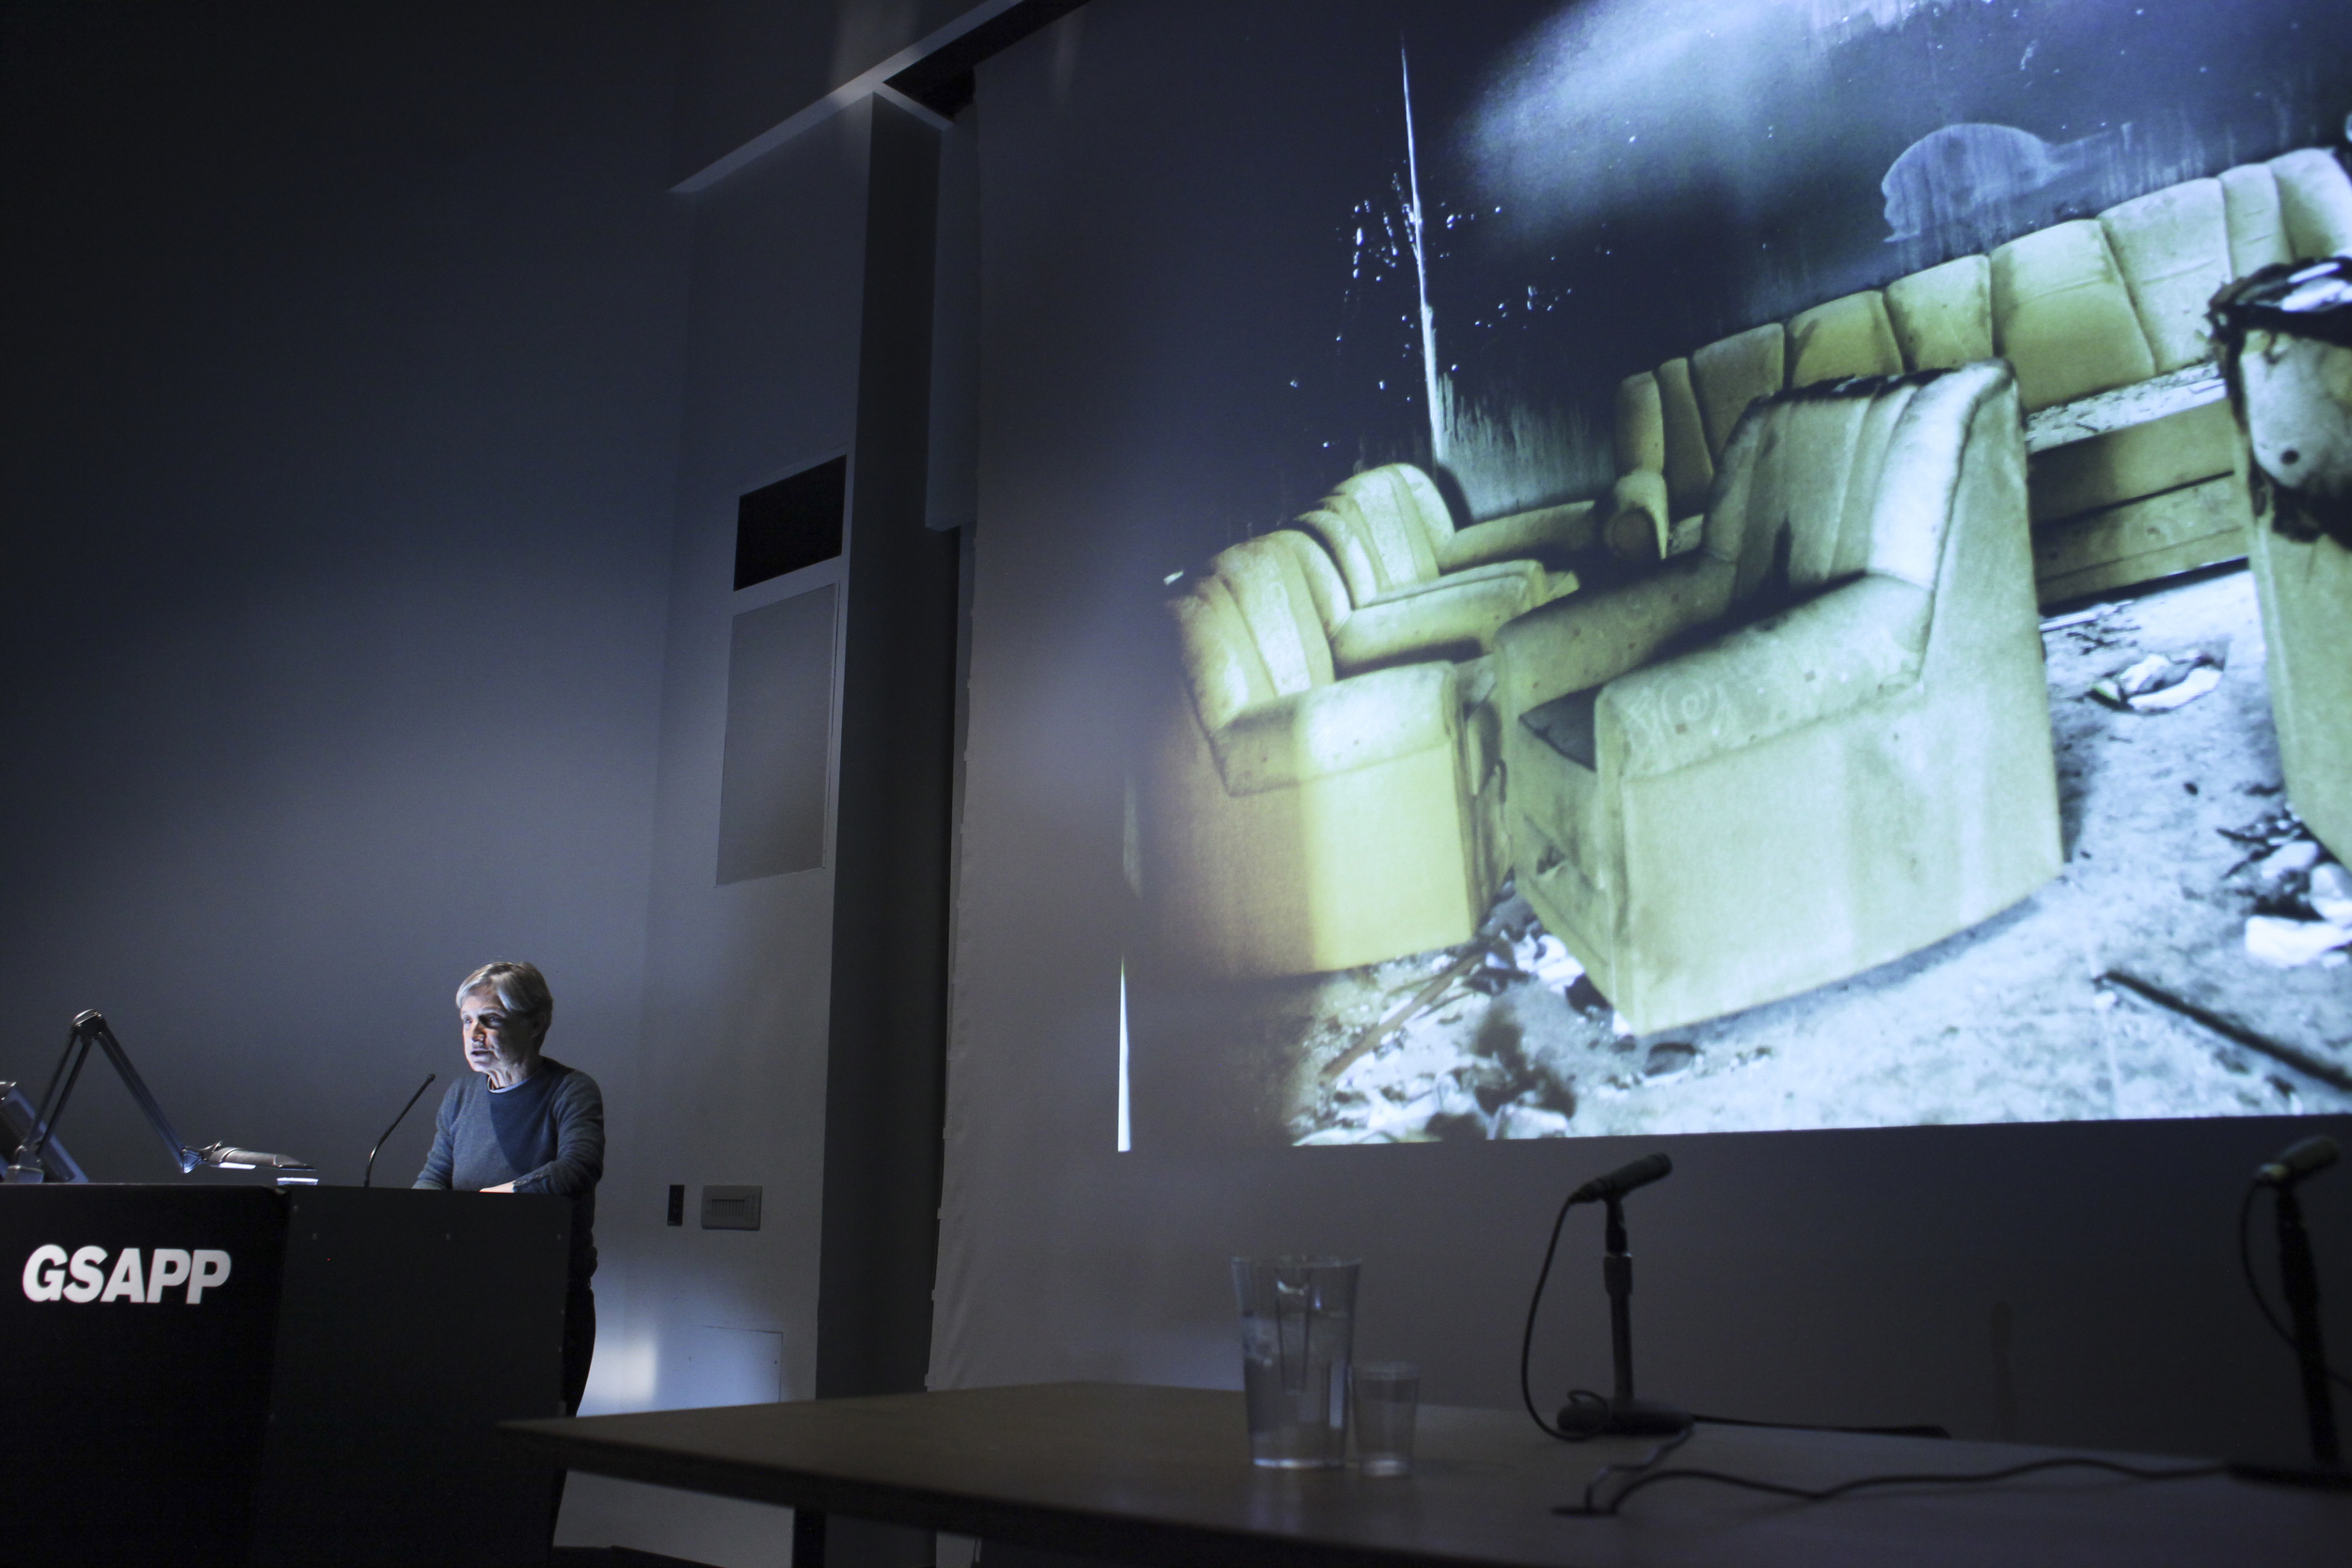  Judith Butler delivers the lecture “Disposses: Kent Klich's Images of Vacated Life in Gaza after 2008.” February 20, 2013, Wood Auditorium, Columbia University.  